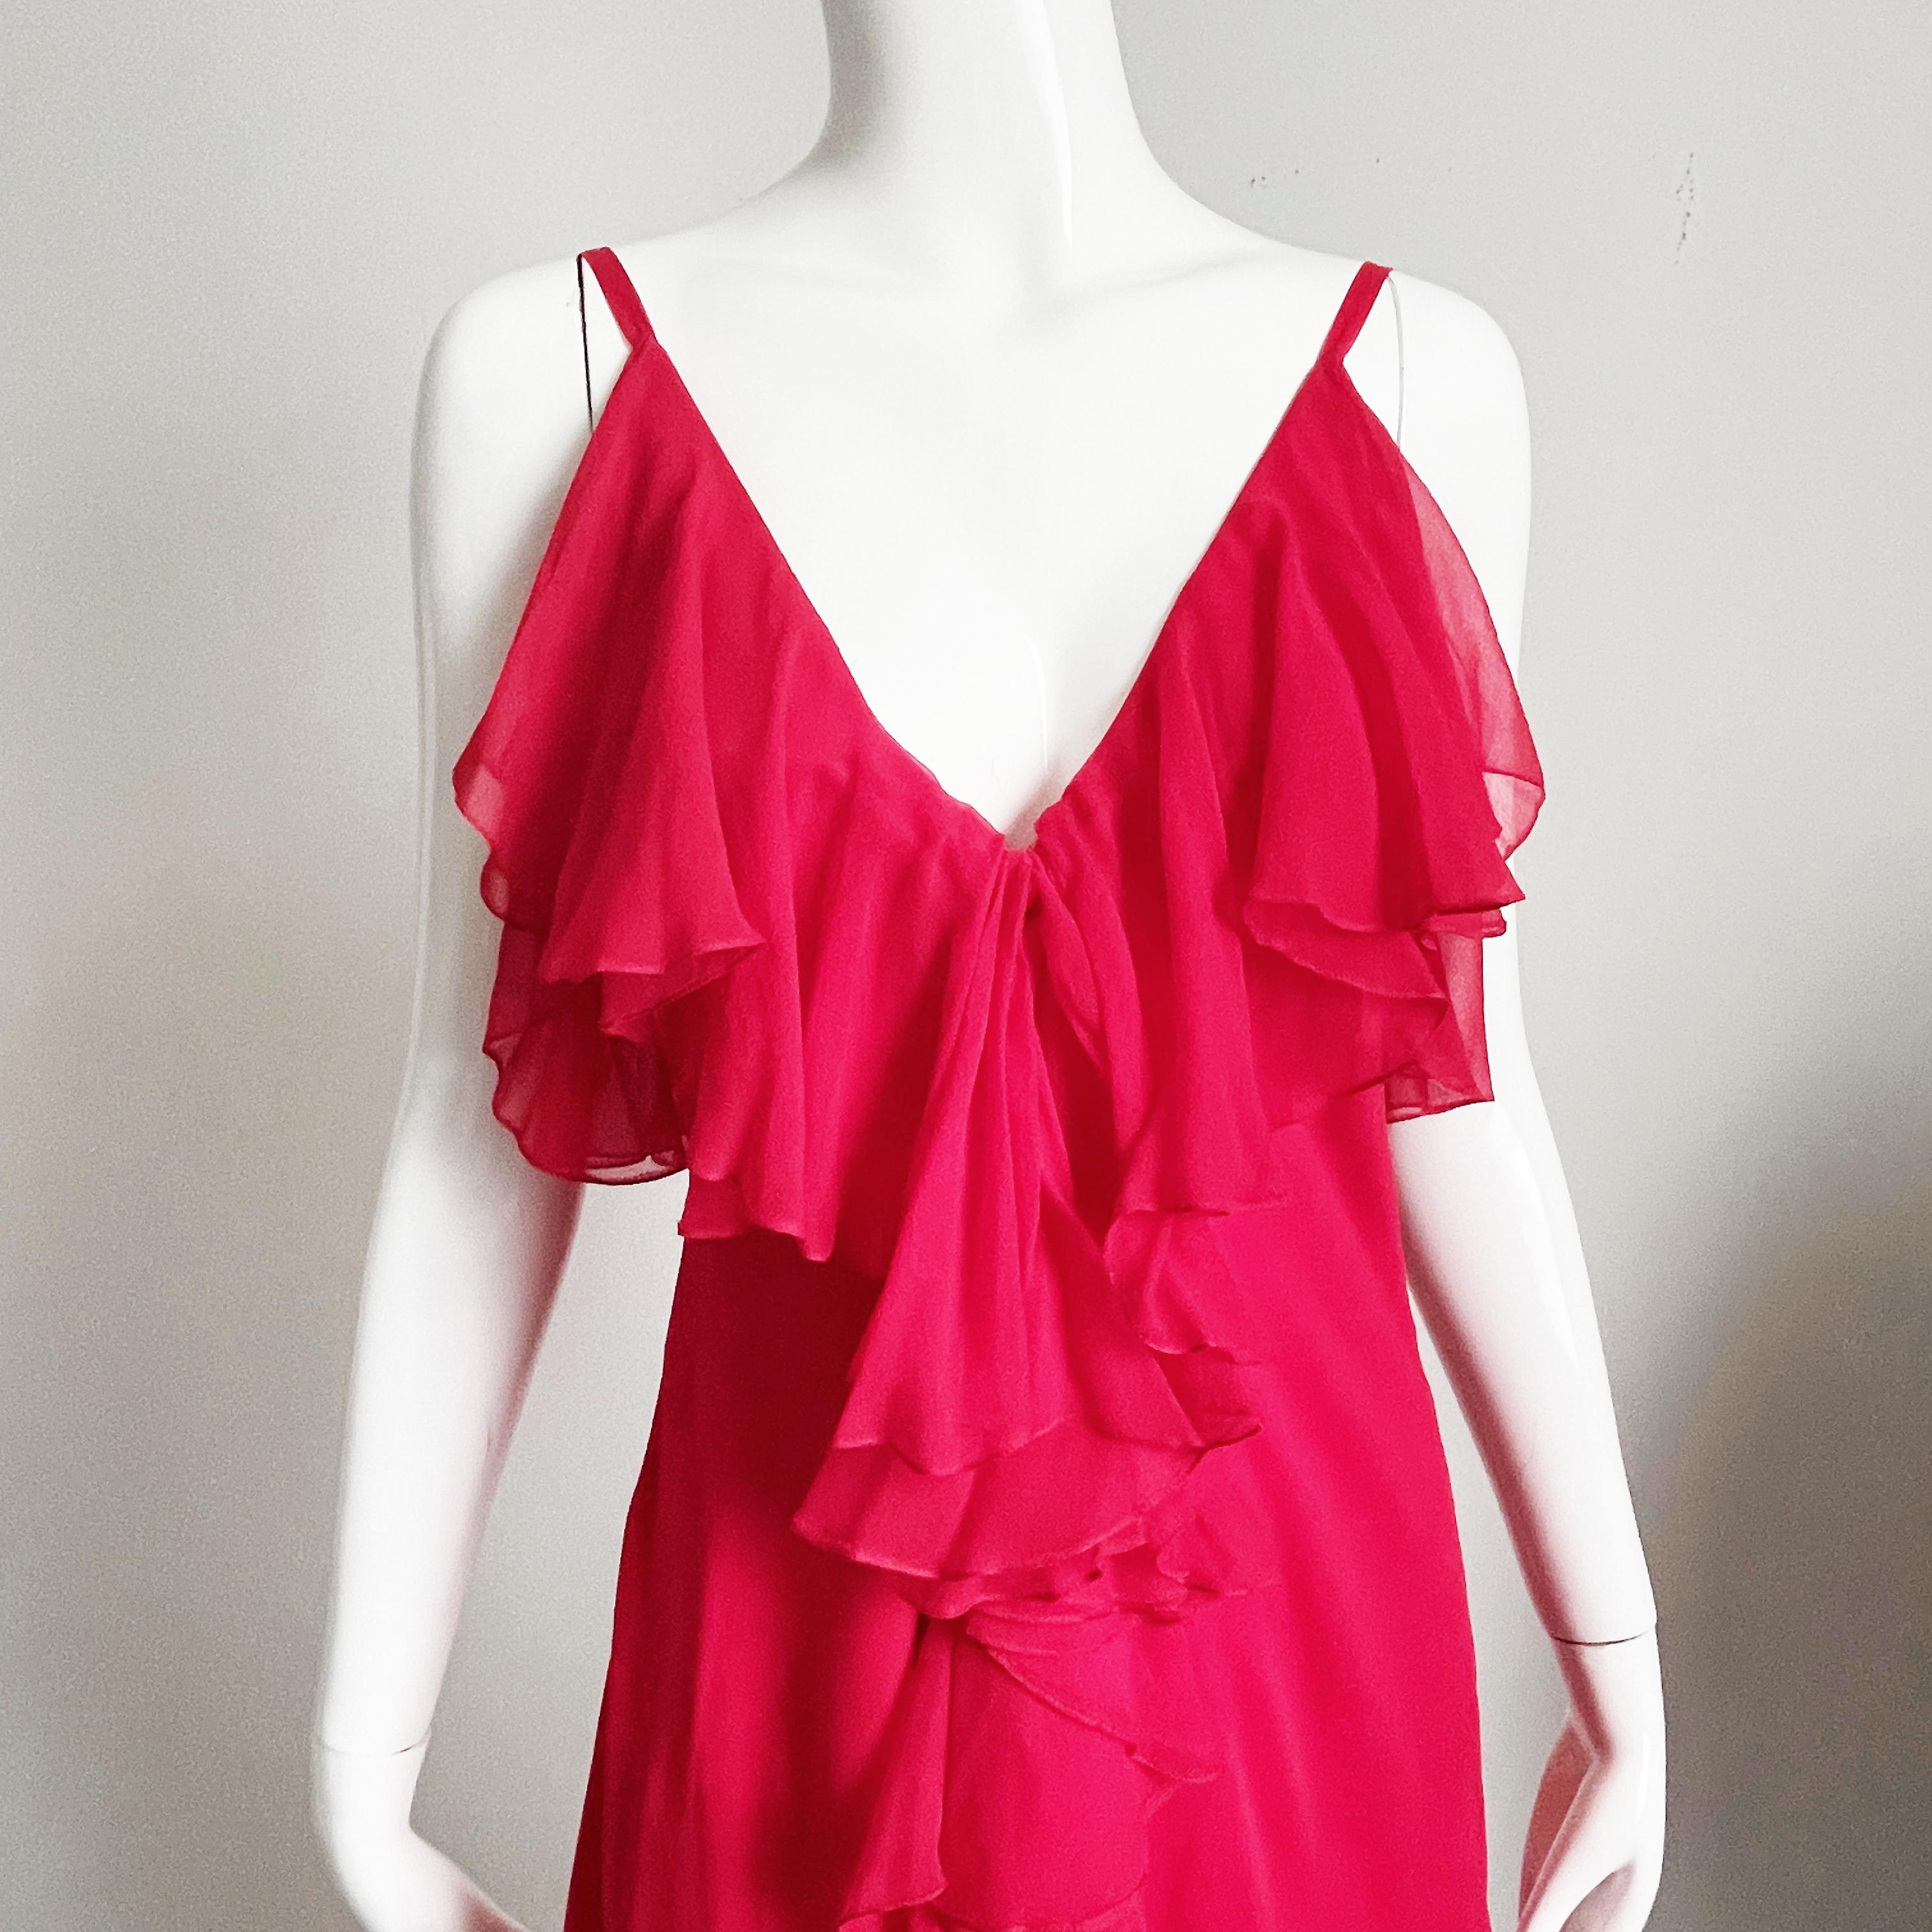 Pauline Trigere Dress and Shawl 2pc Set Red Silk Chiffon Loose Ruffles Vintage For Sale 5